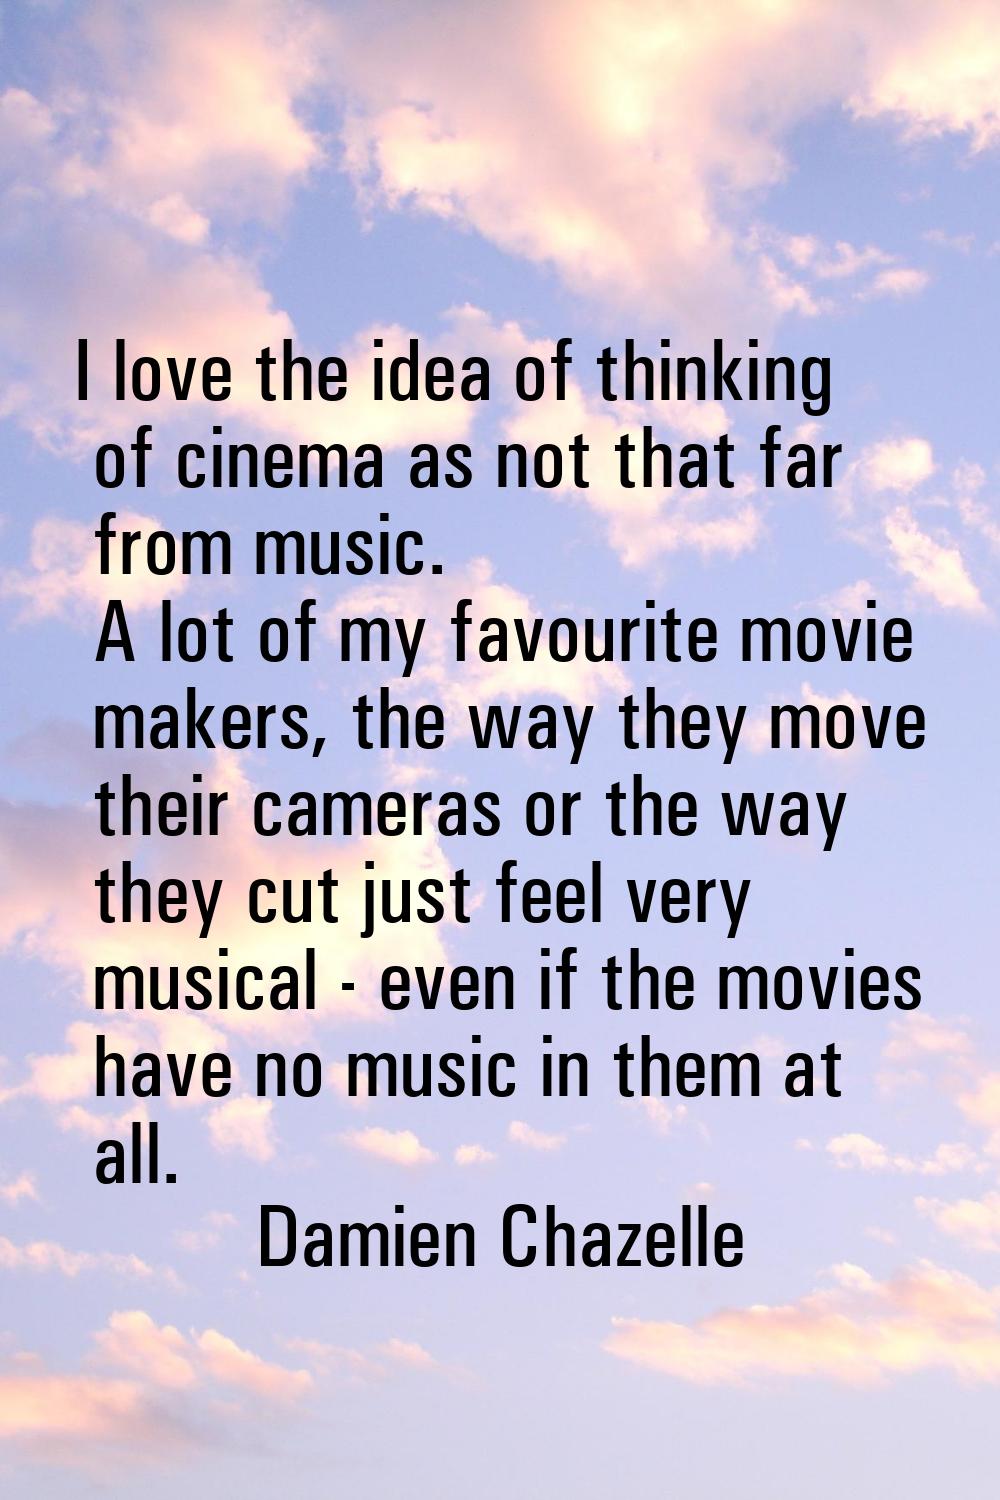 I love the idea of thinking of cinema as not that far from music. A lot of my favourite movie maker